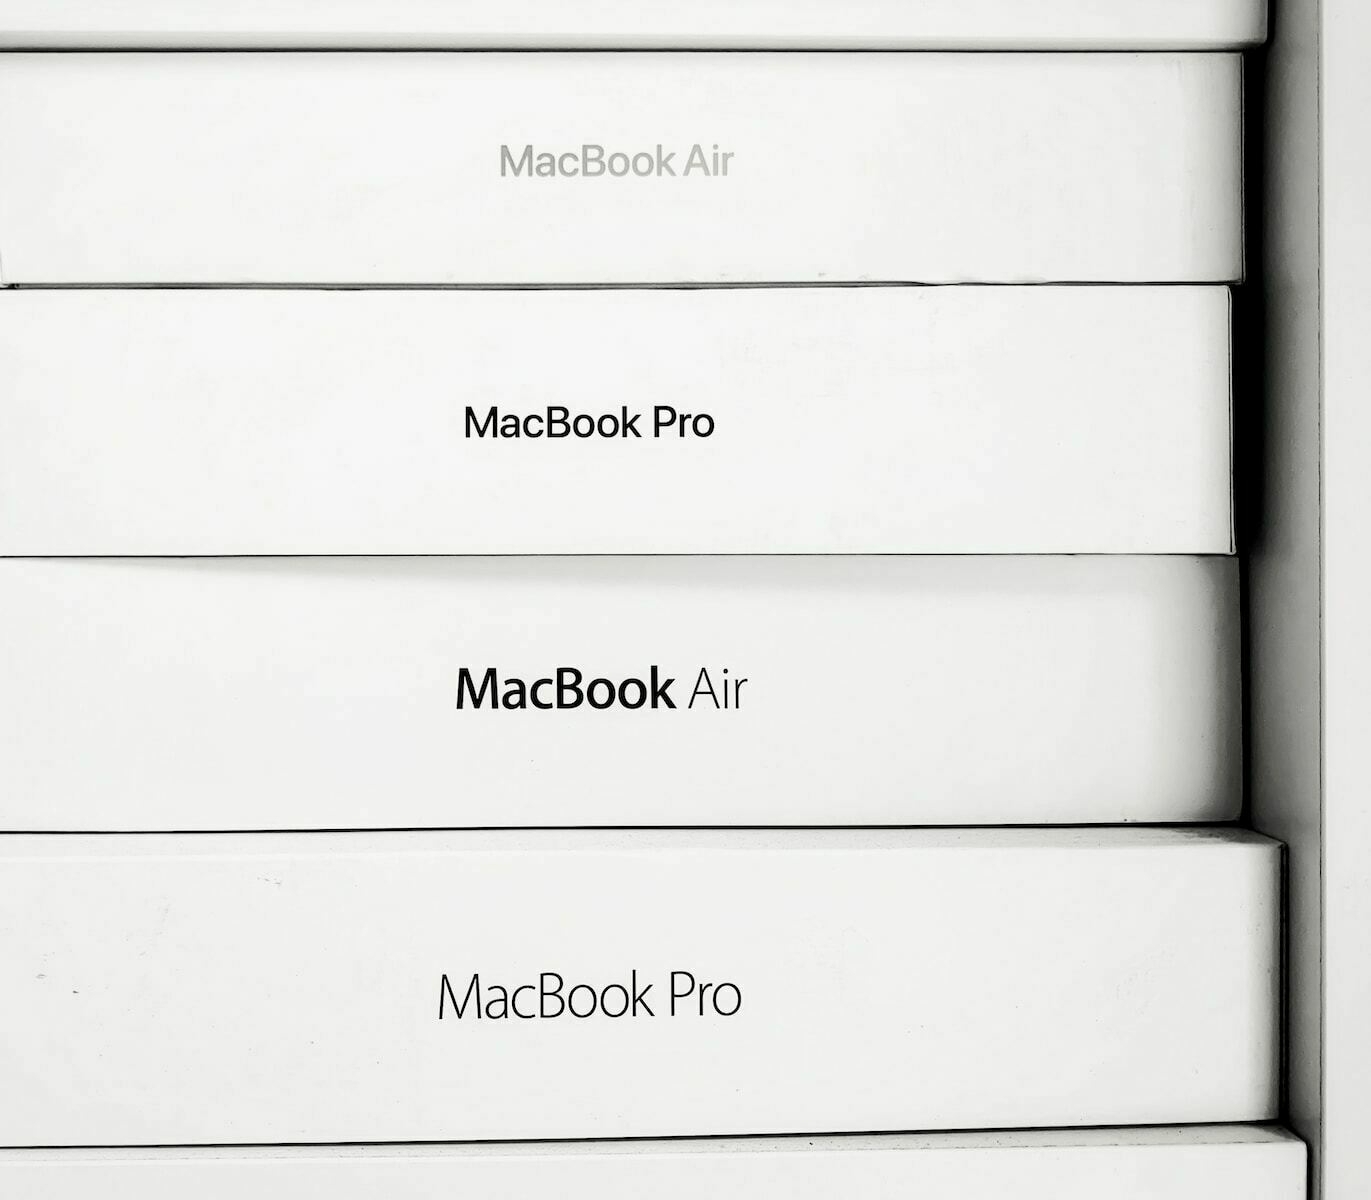 A stack of MacBook Air and MacBook Pro boxes, label out.